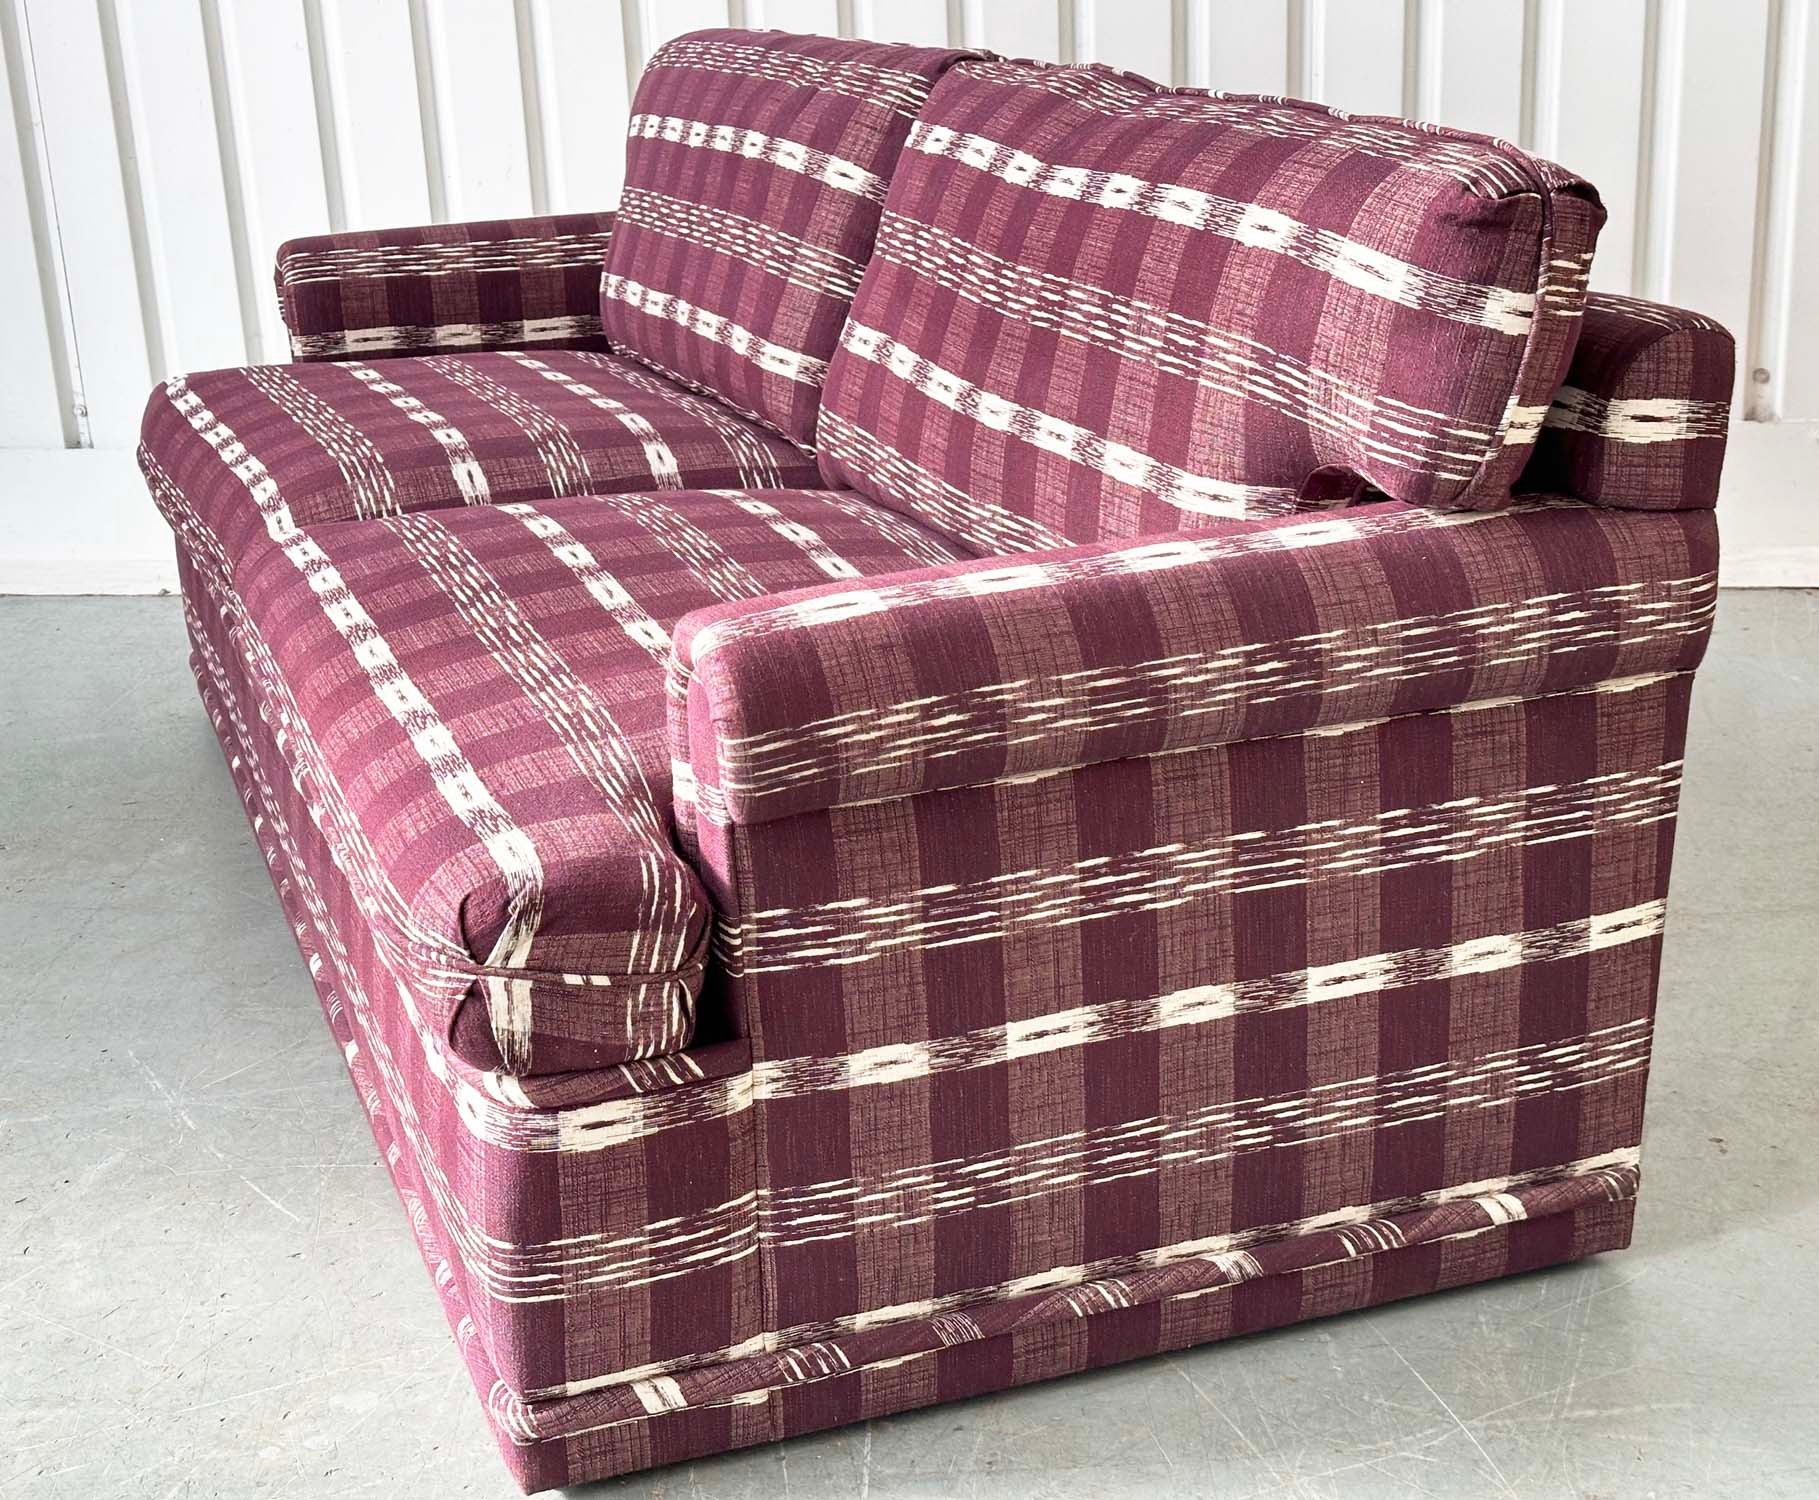 SOFA, Swedish check purple/white upholstery with scroll arms, 203cm W. - Image 7 of 9